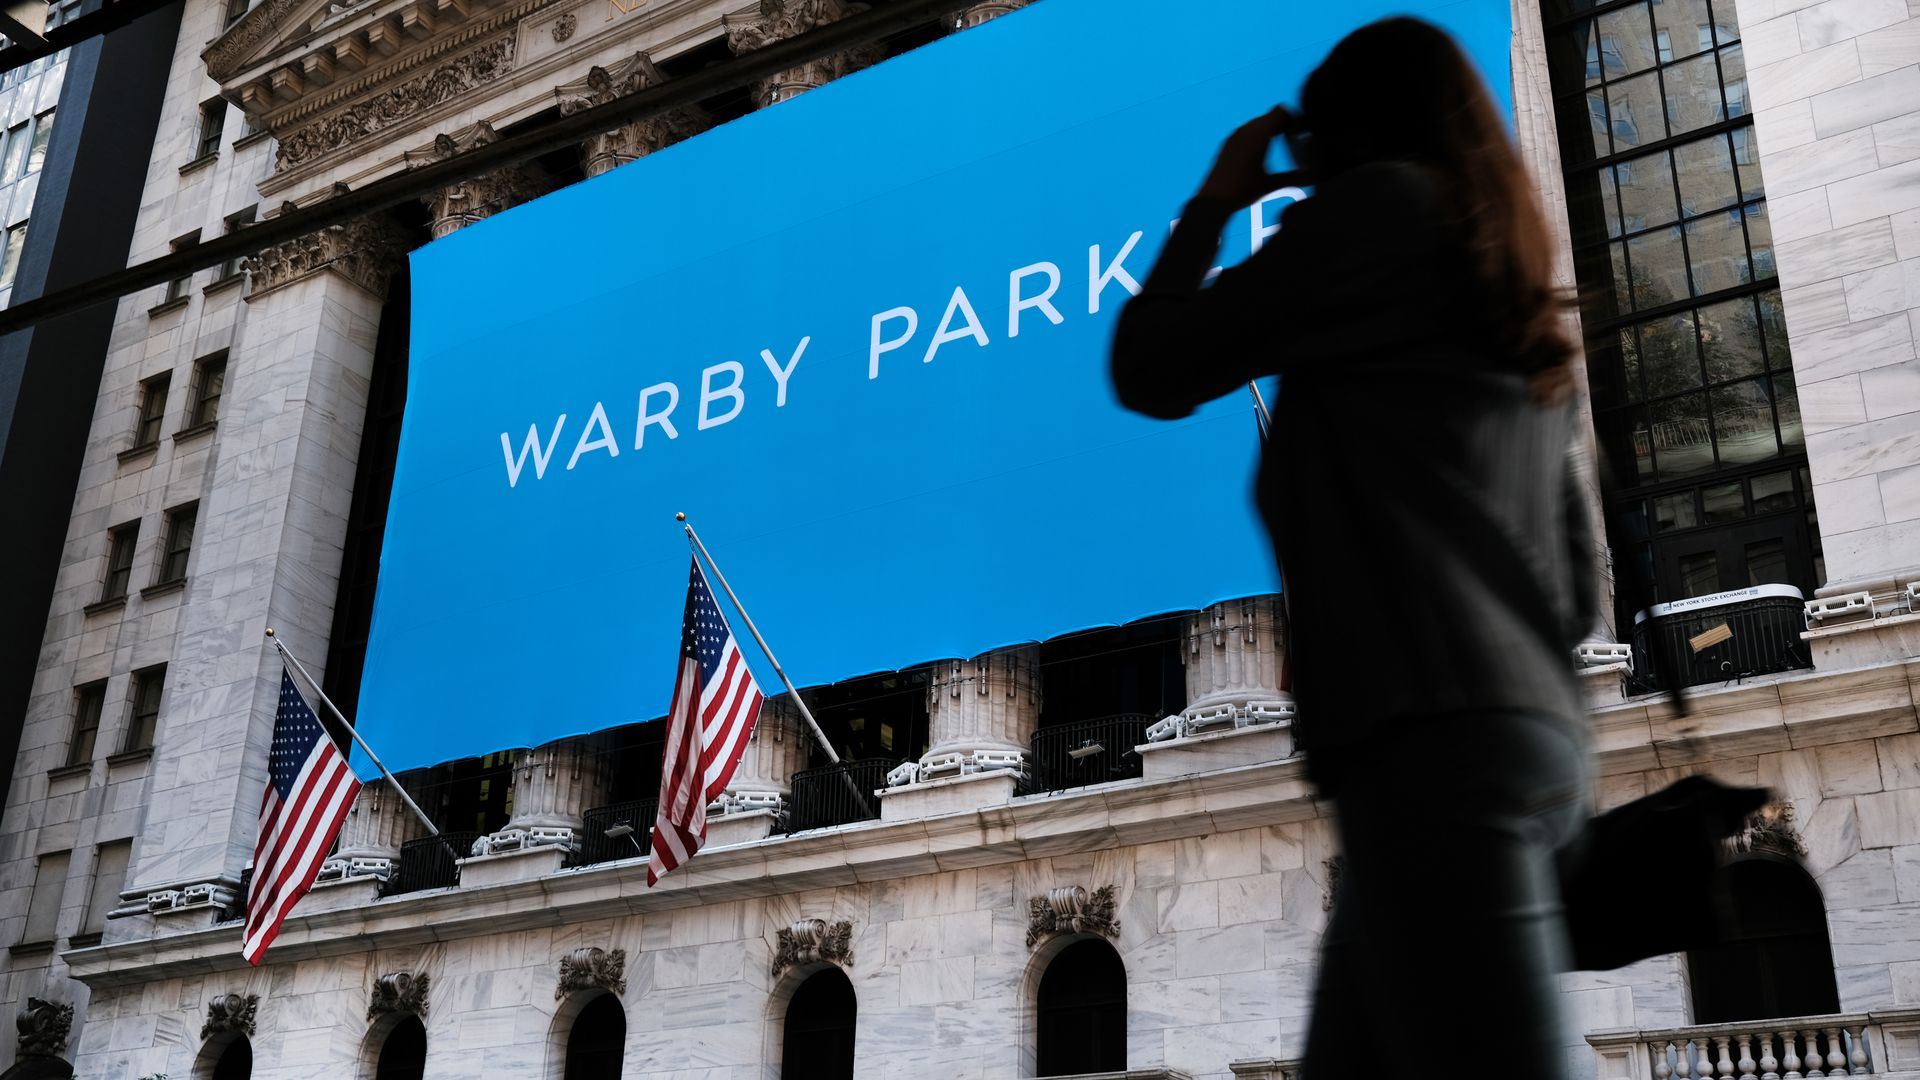 Photo of a person walking in front of a building with a huge screen that says "Warby Parker"